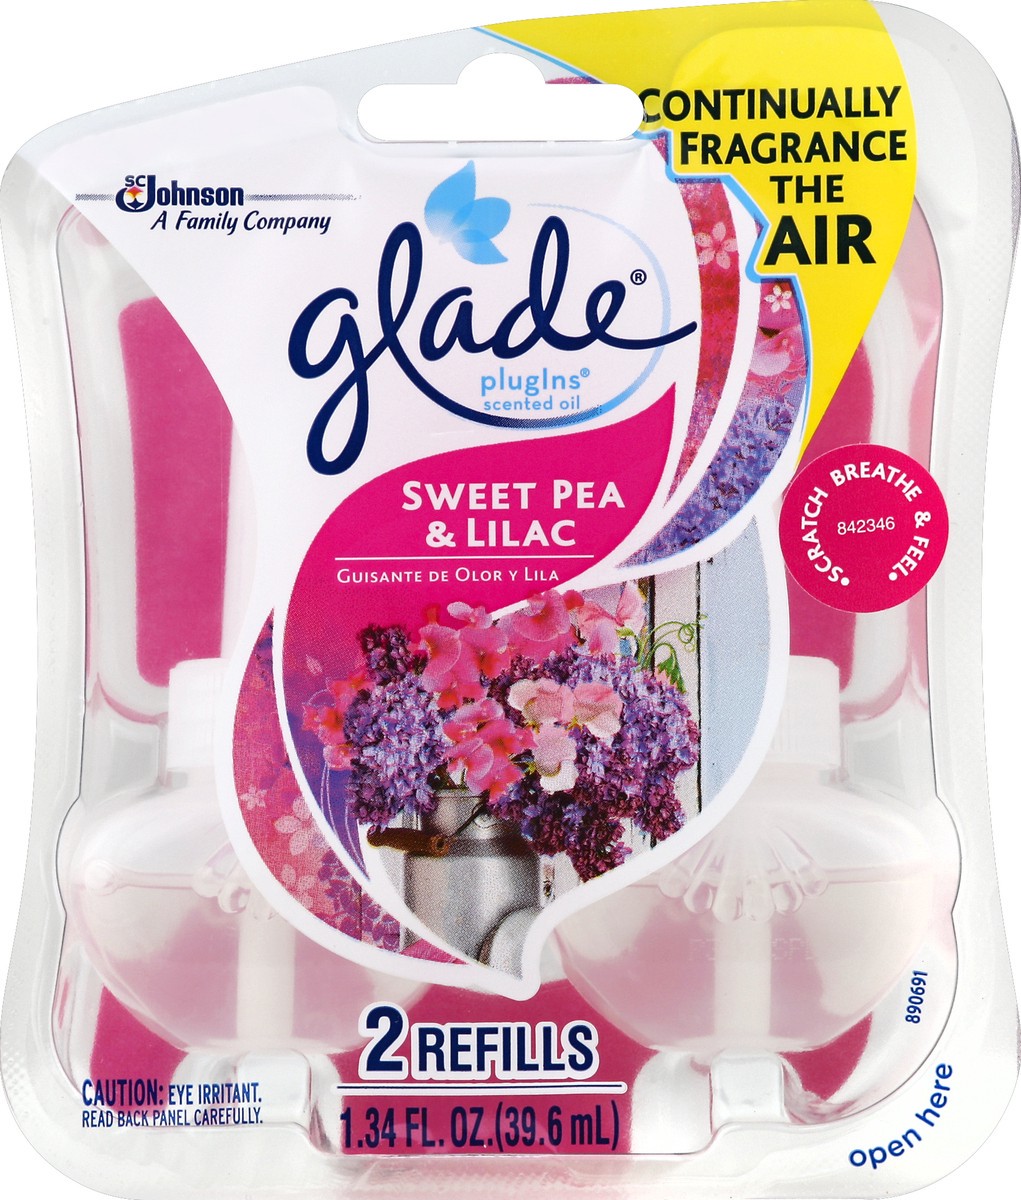 slide 2 of 2, Glade PlugIns Scented Oil Refills Sweet Pea & Lilac, 2 ct; 1.34 oz